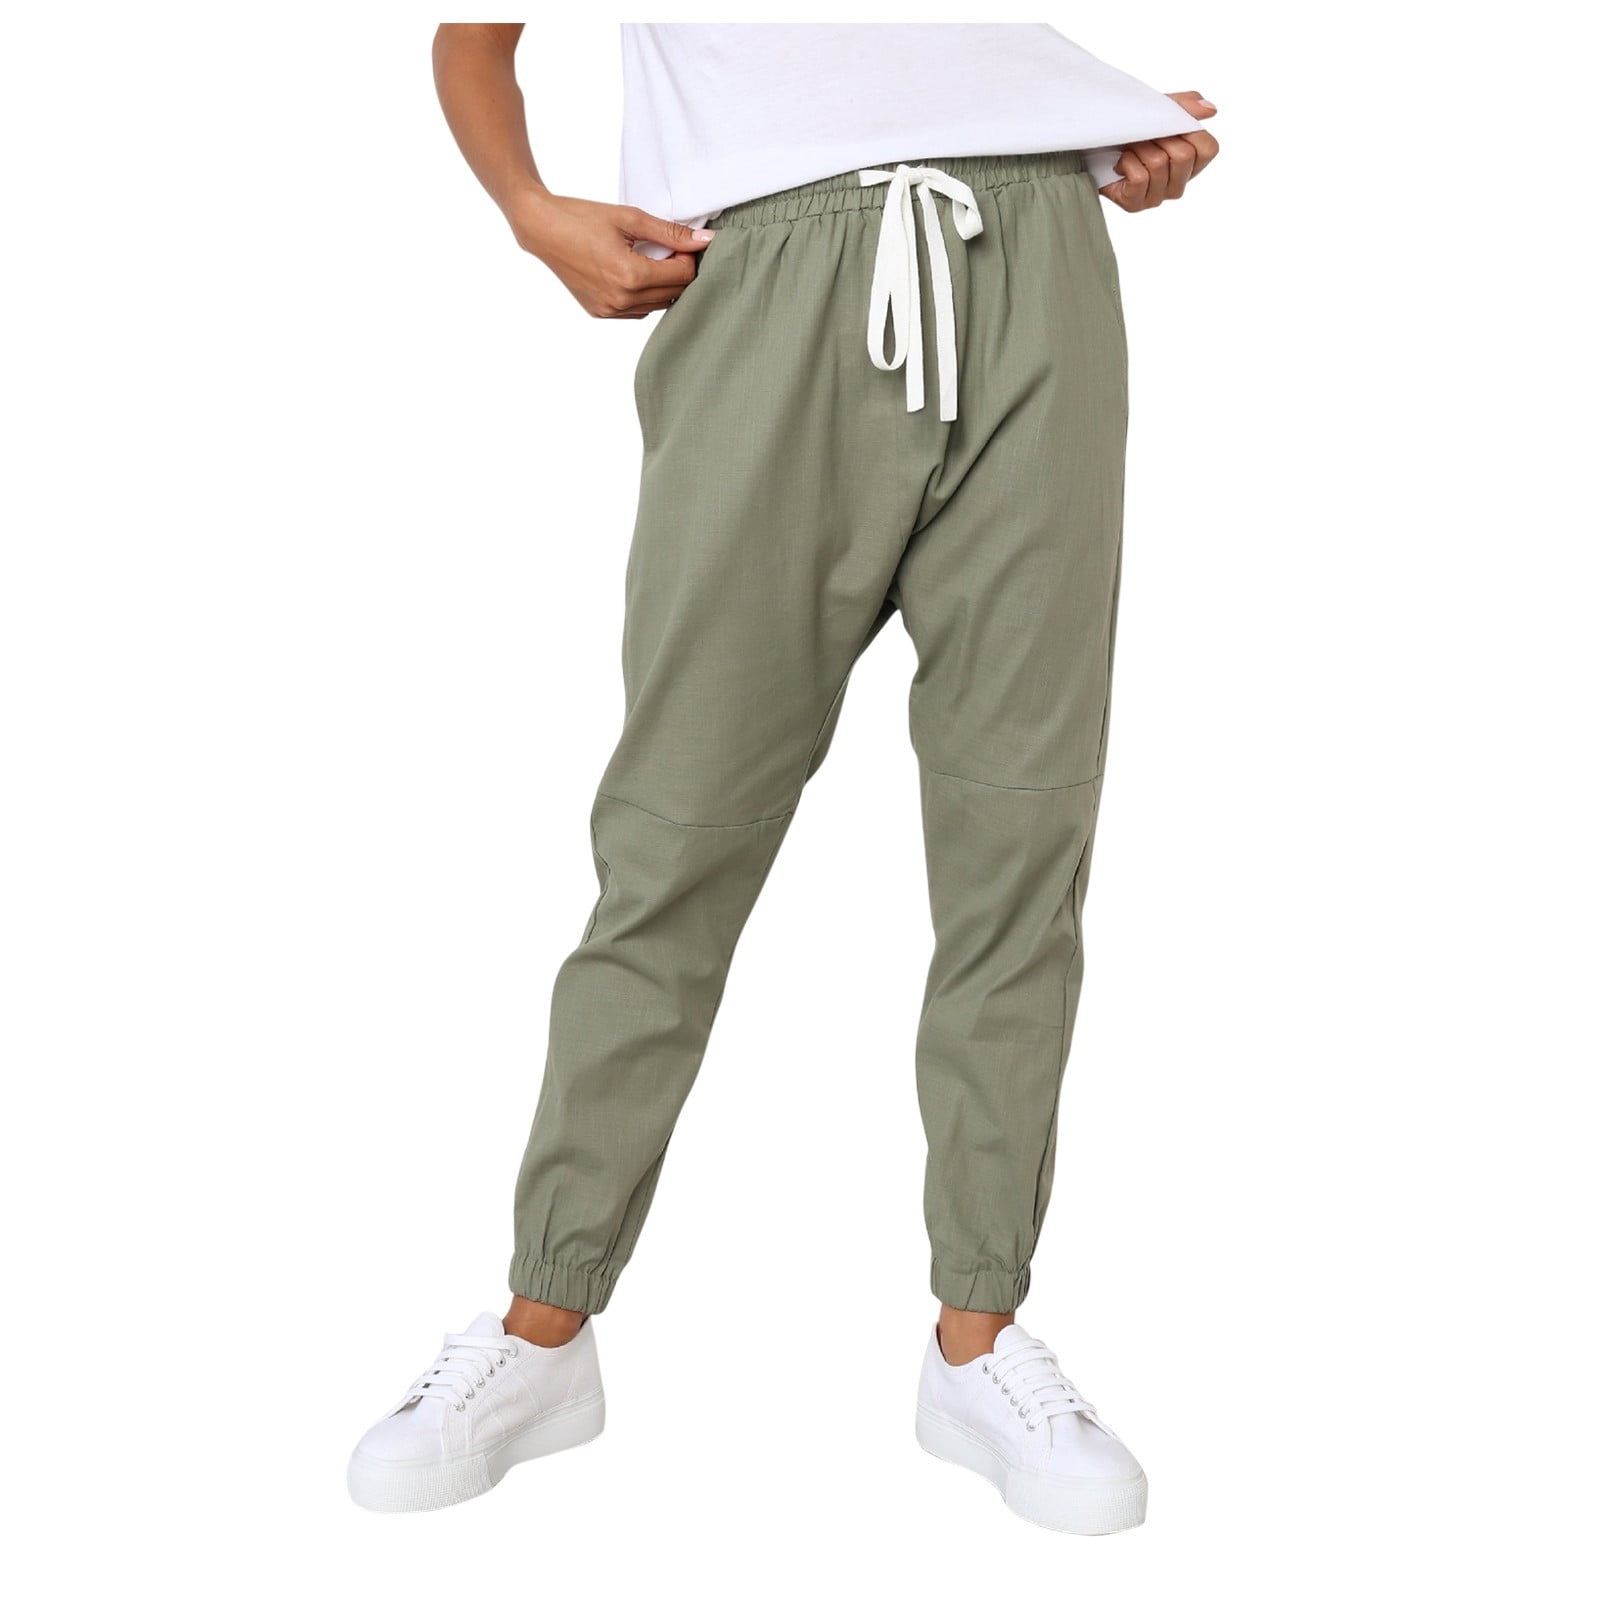 Mrat Girls Baseball Pants Full Length Pants Womens Casual Solid Color Drawcord With Pockets And Cropped Casual Trousers Lounge Pants with Pockets Army Green XL